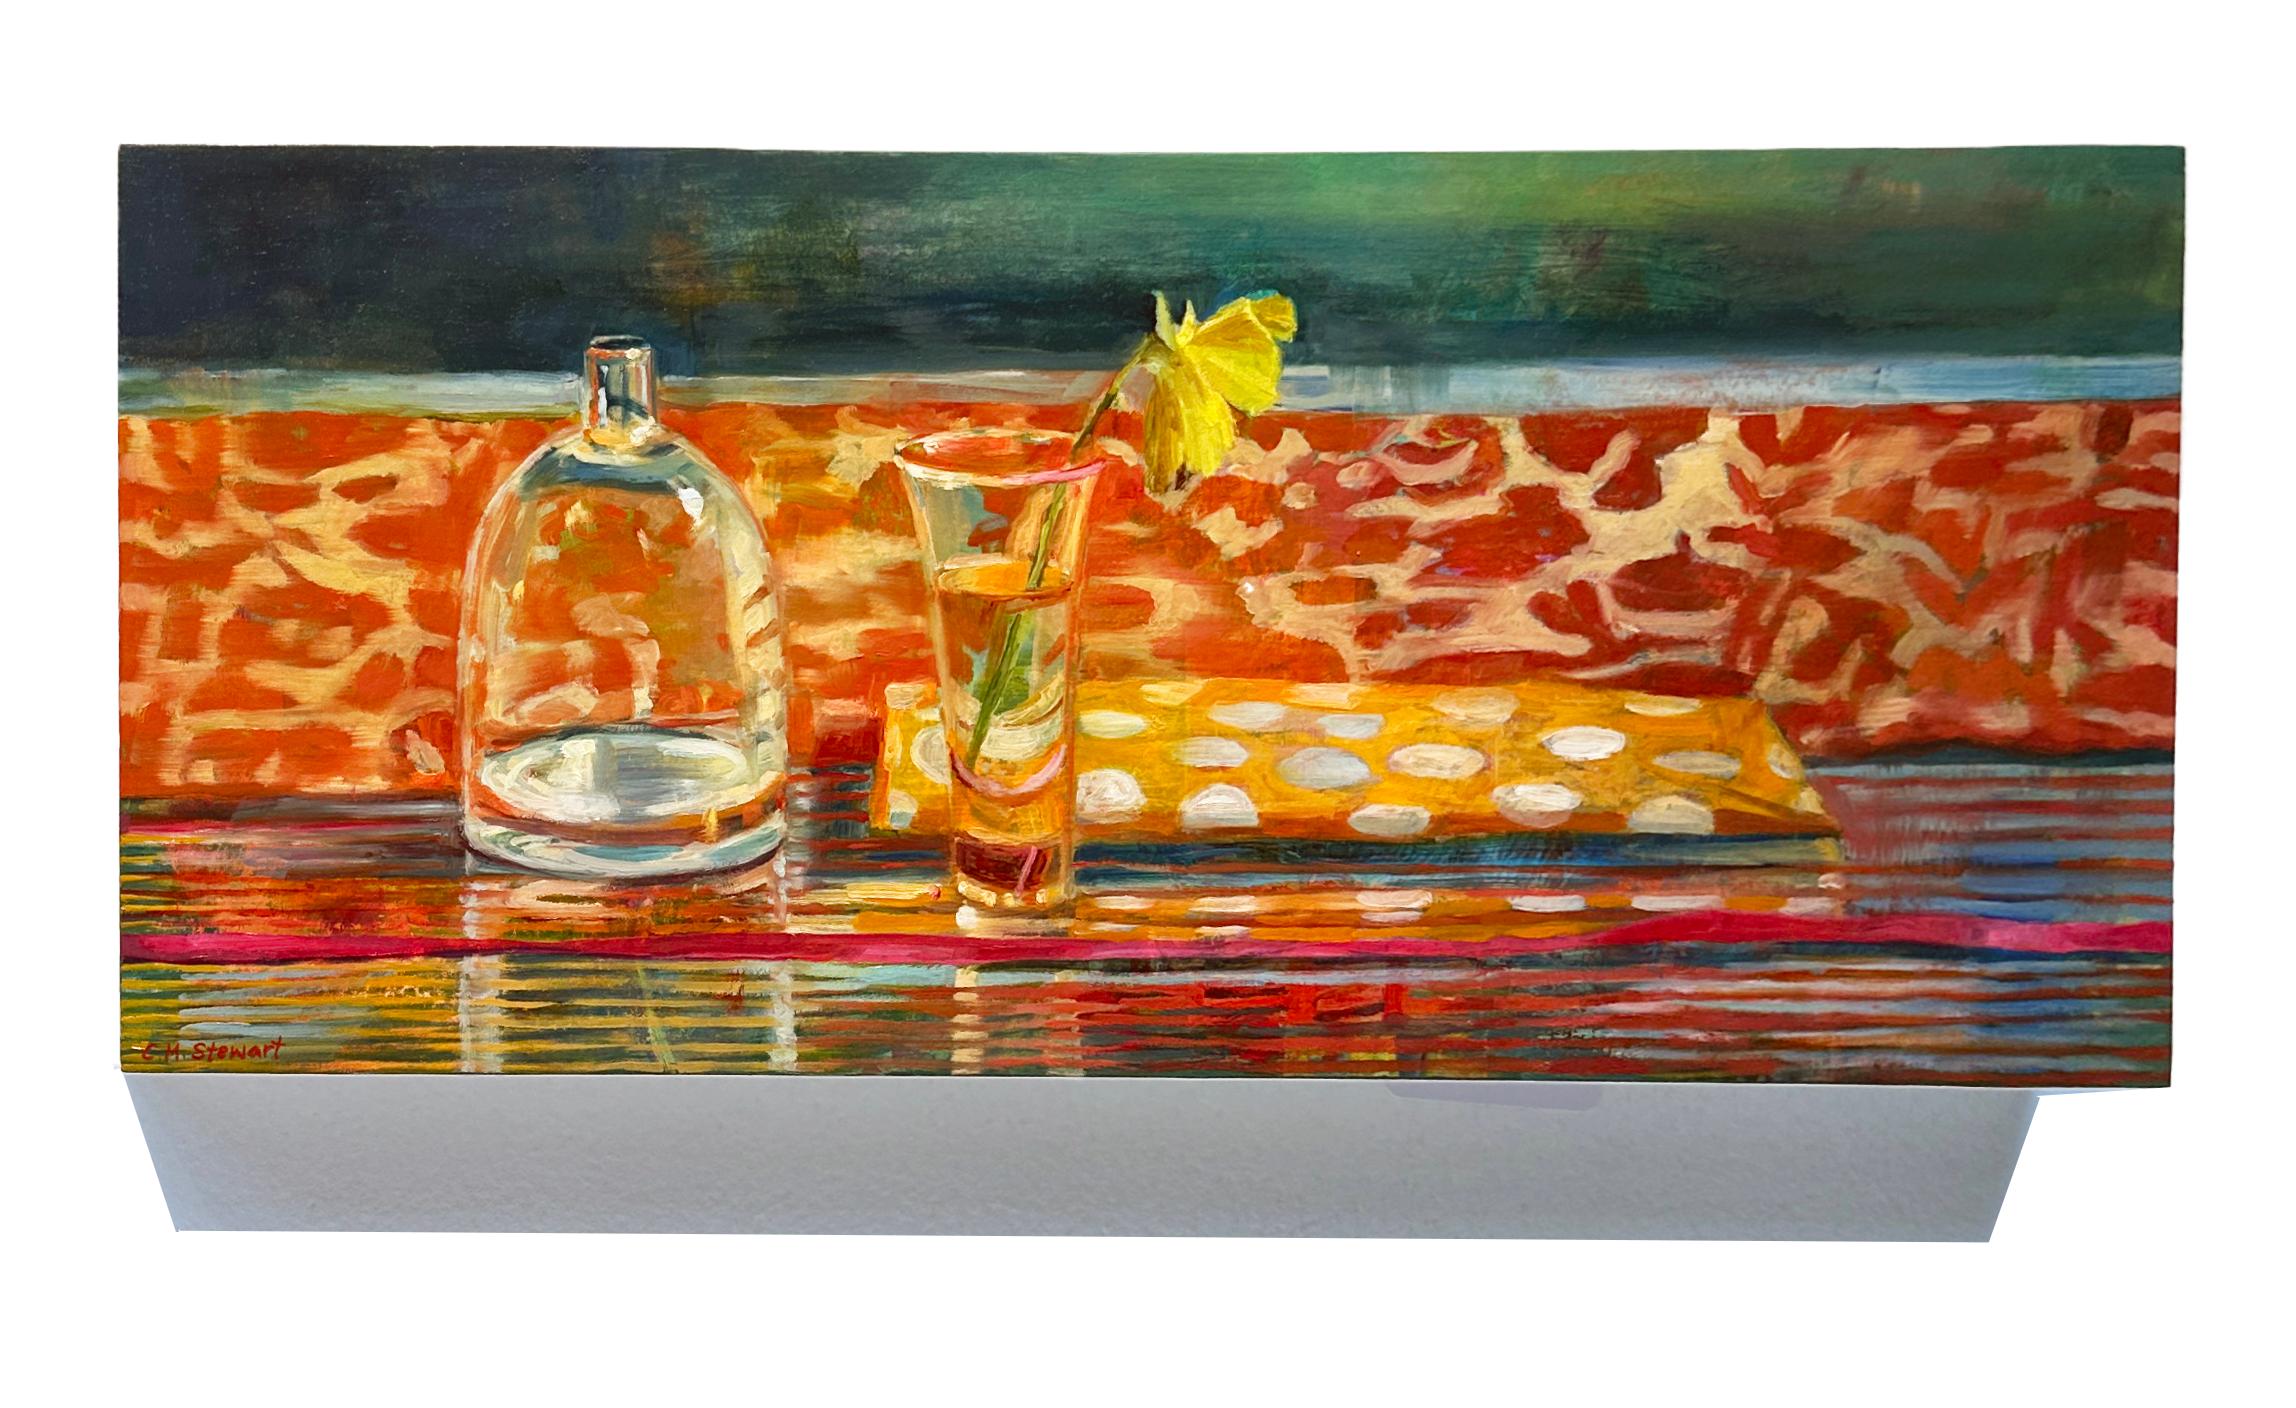 Pansy and Patterns - Vibrantly Patterned Fabric, Reflective Glassware & a Pansy - Impressionist Painting by Carol Stewart